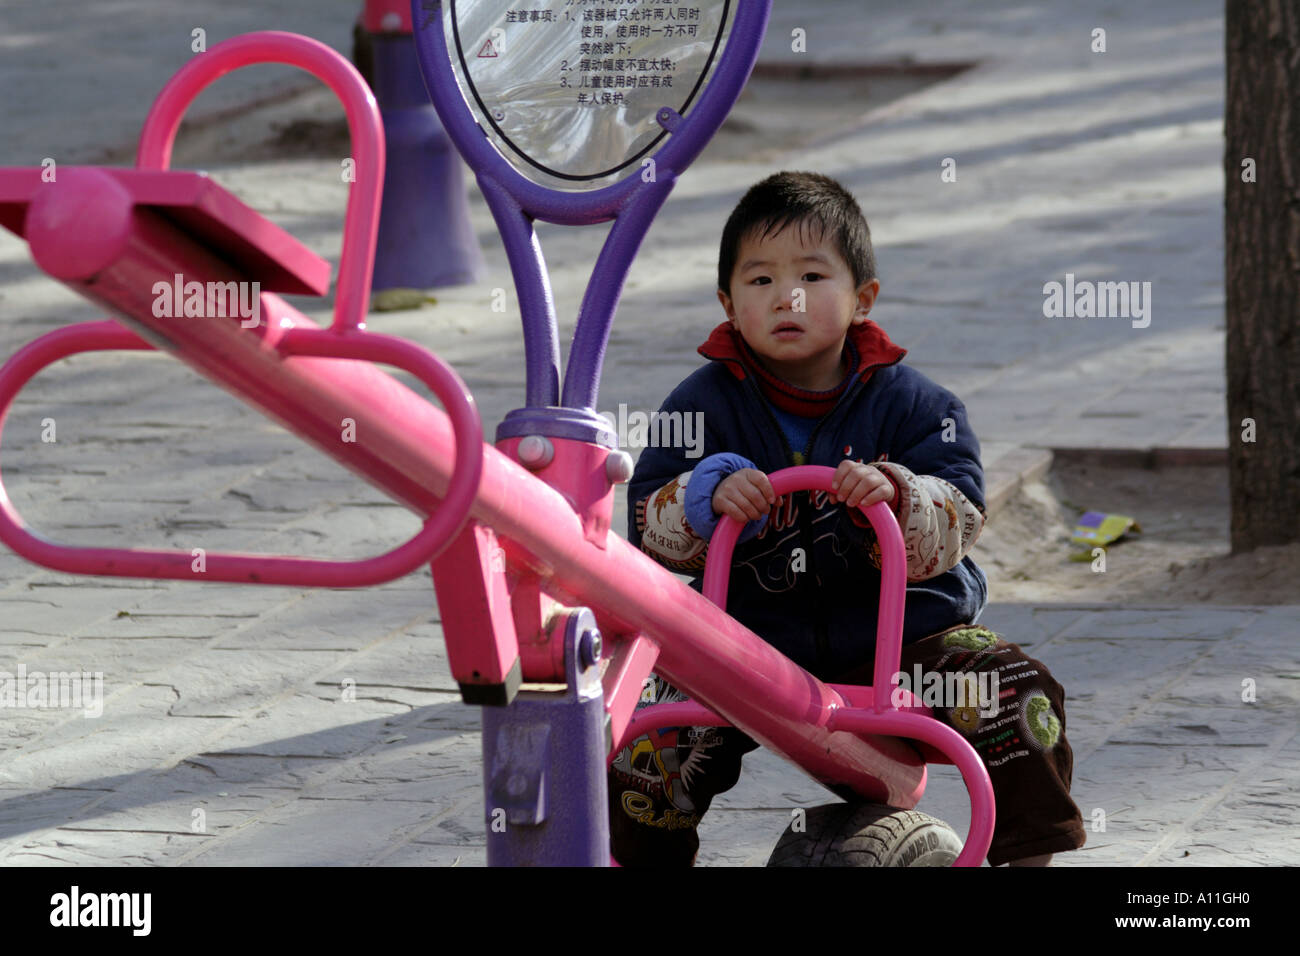 Chinese one child policy leaves this boy alone on a Playground teeter ...